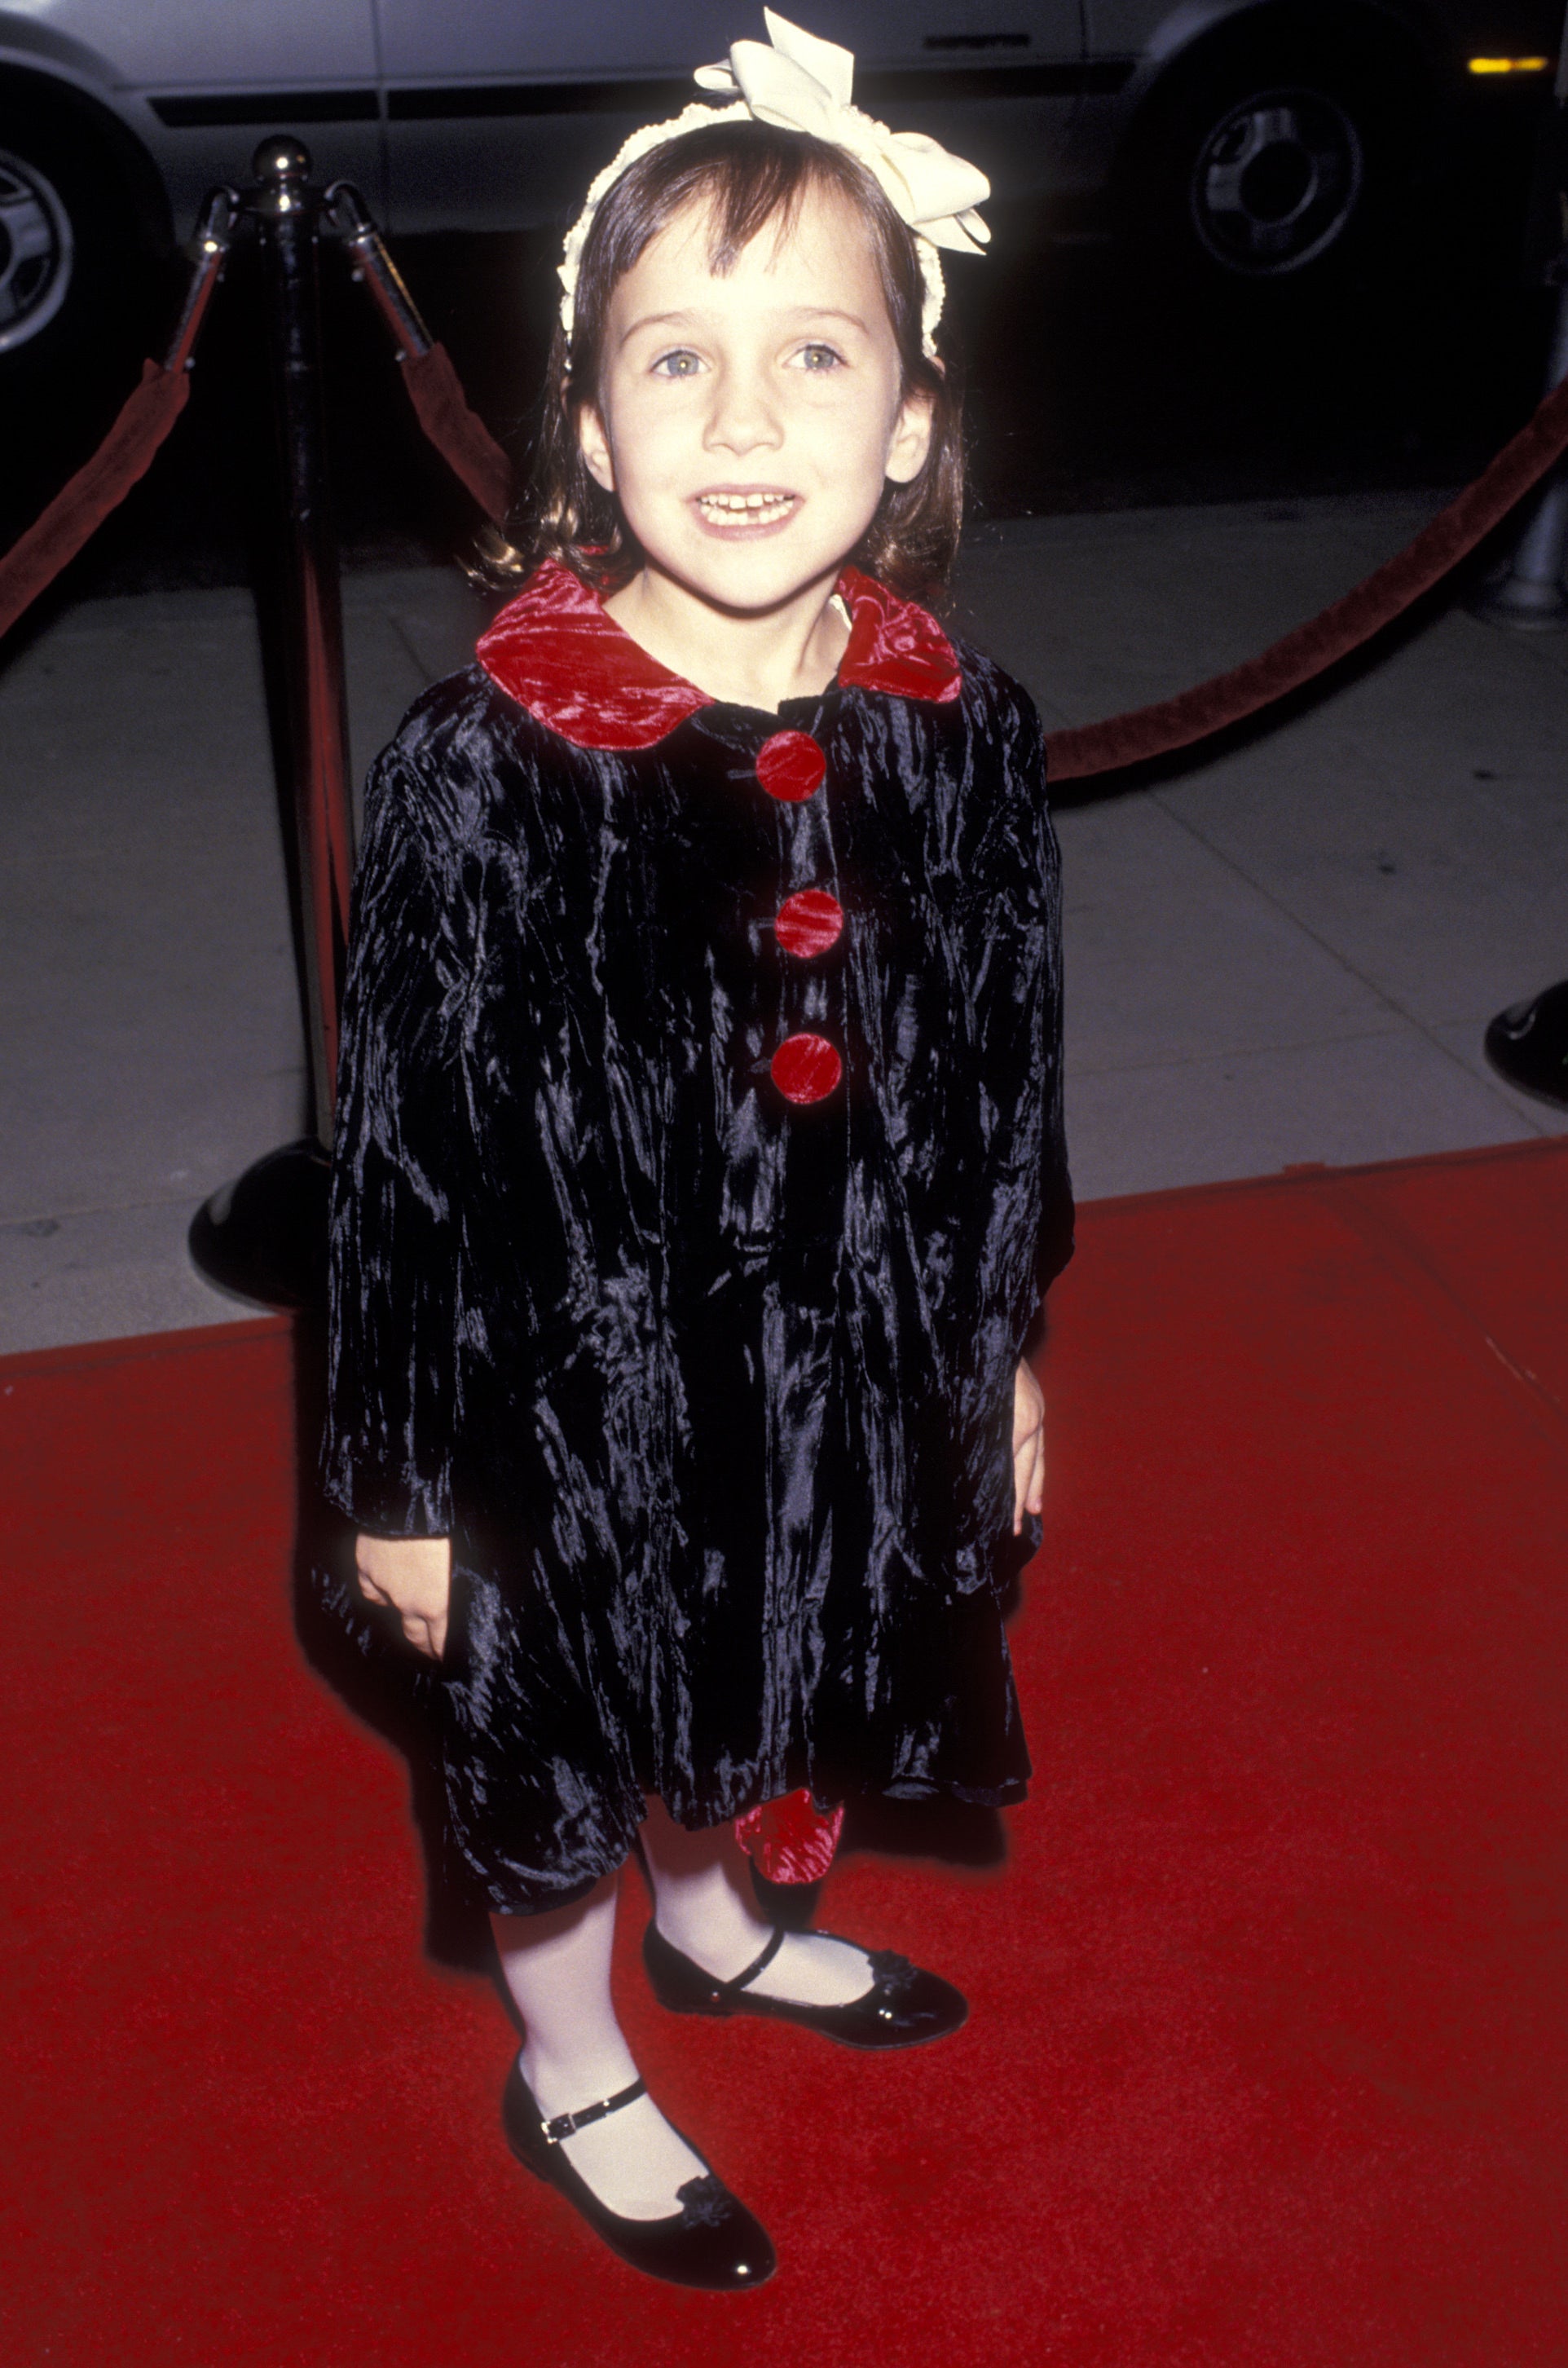 mara as a child on the red carpet